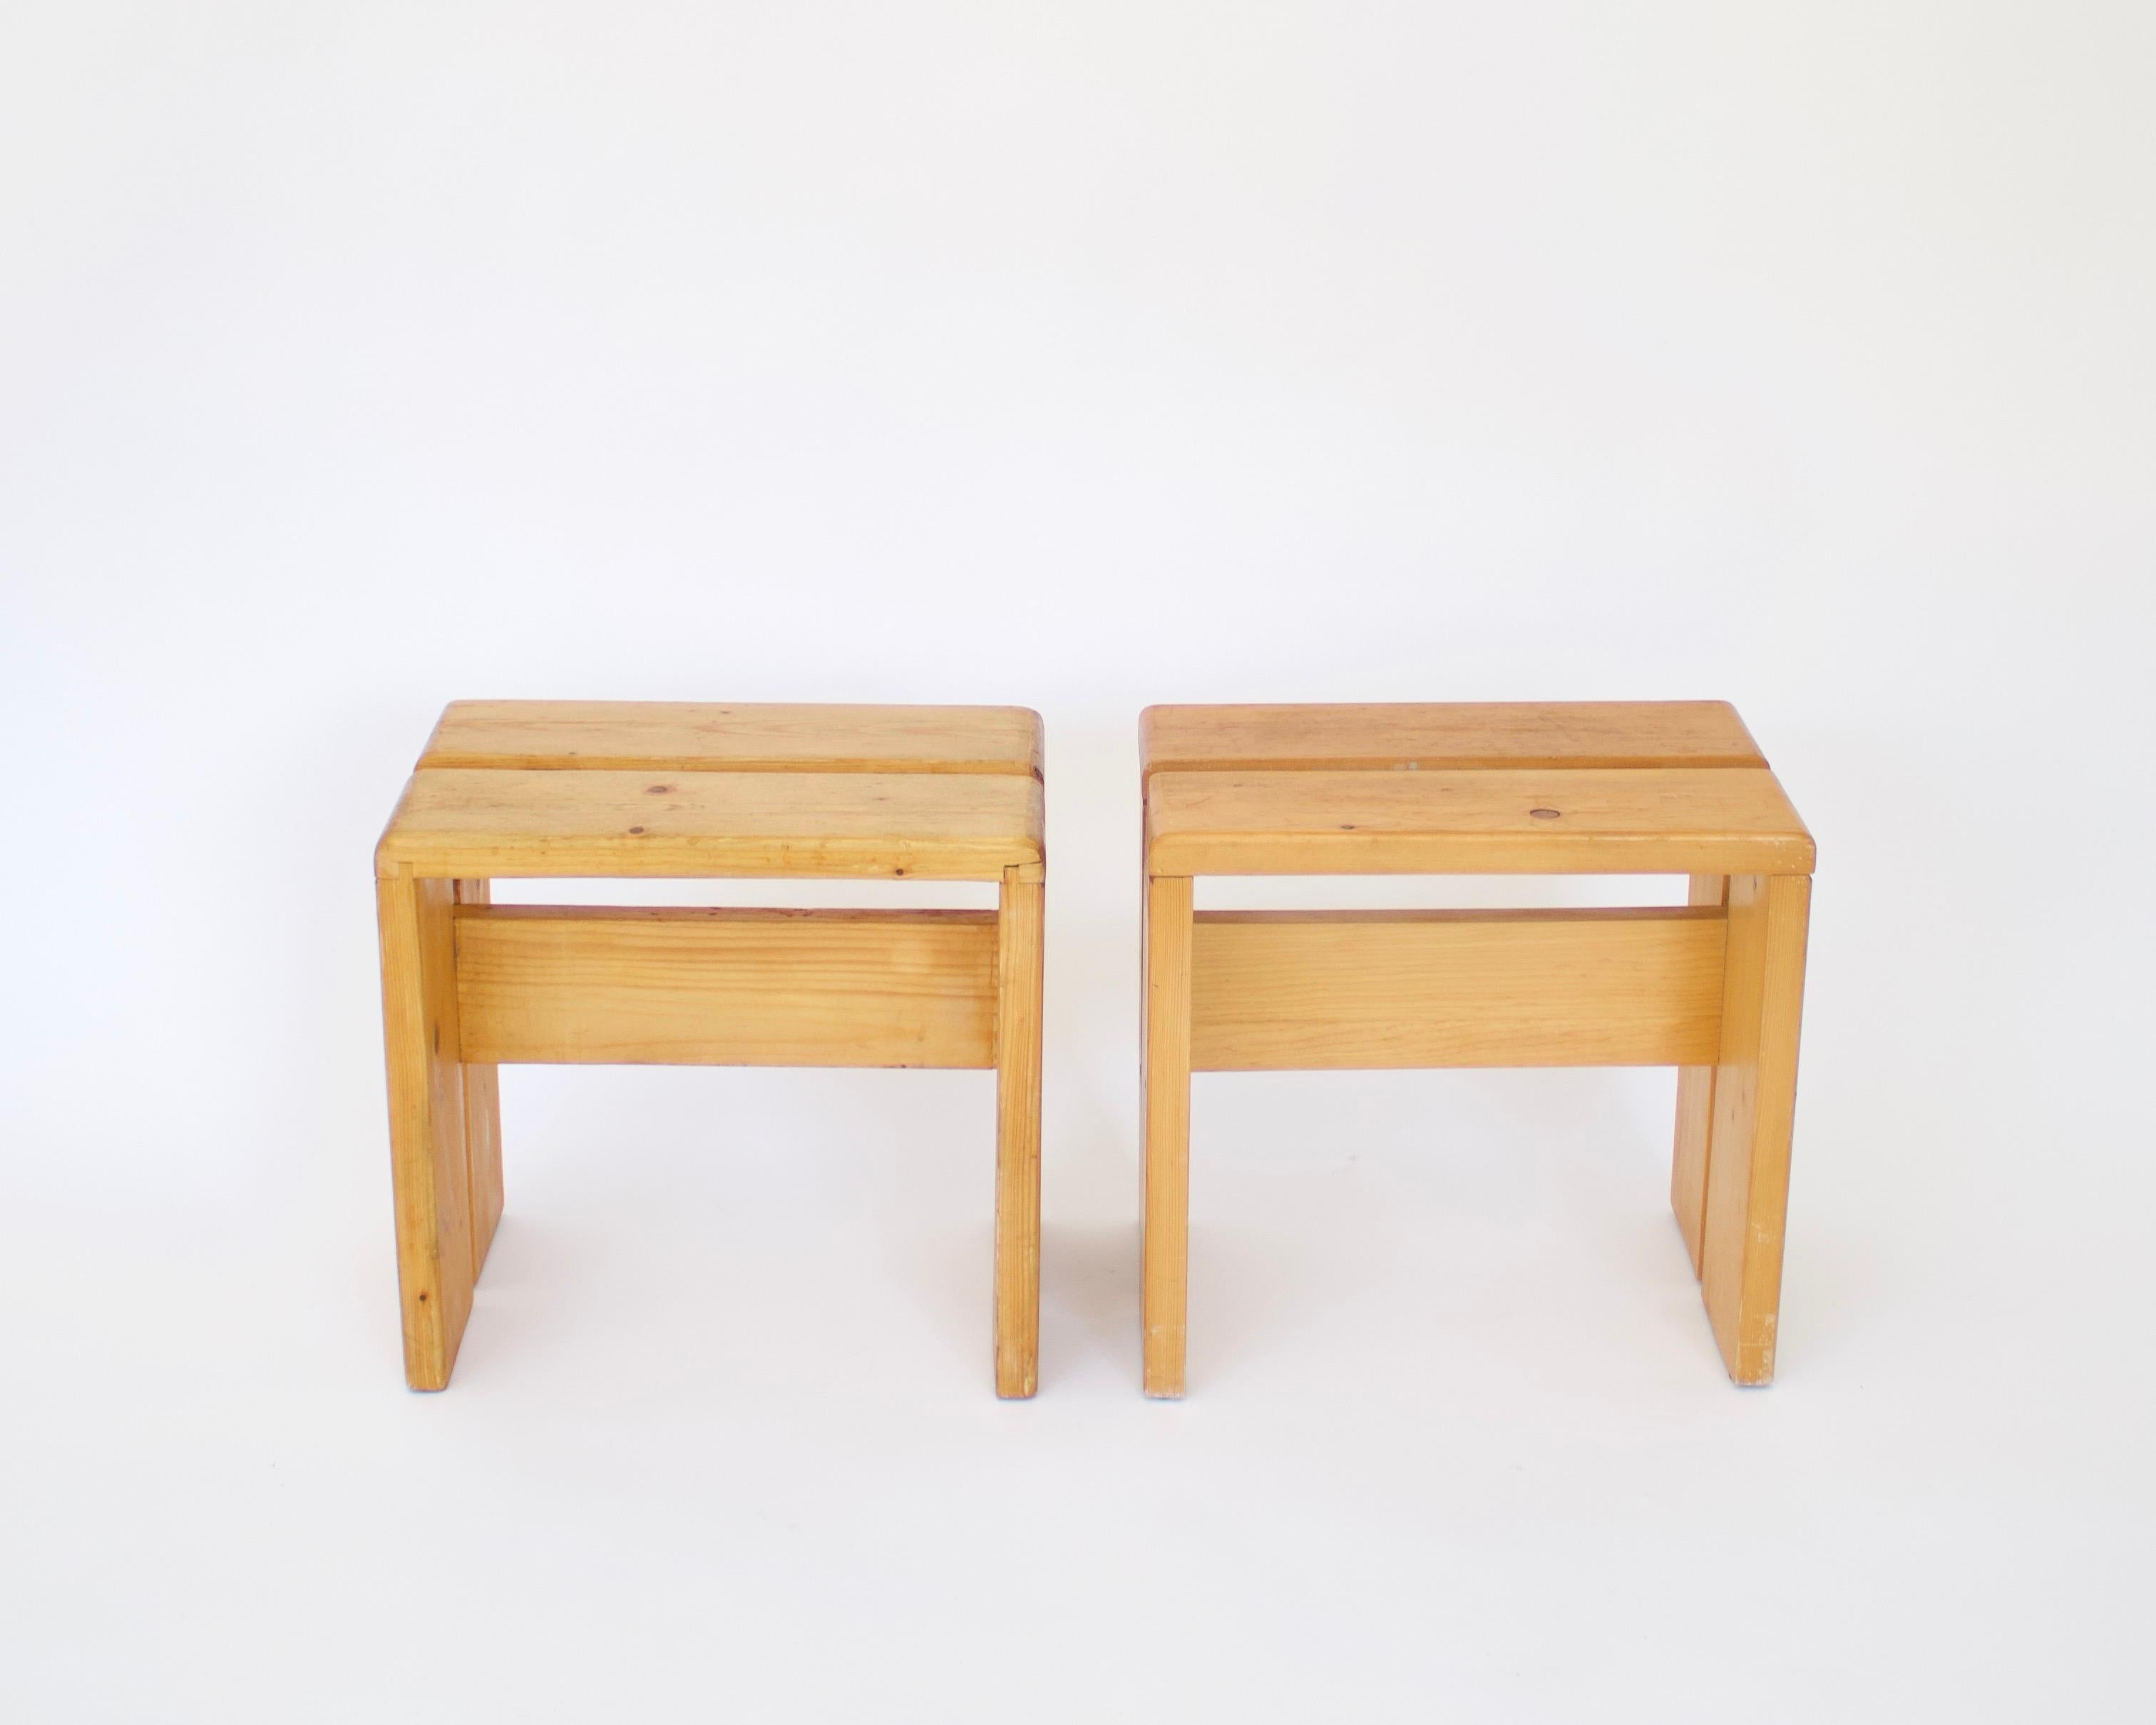 Charlotte Perriand pair of iconic pine wood stools or tables for Les Arcs ski resort, circa 1960.
Manufactured in France. 
These are the iconic Charlotte Perriand simple and straightforward pine stools used commonly throughout the ski resort.